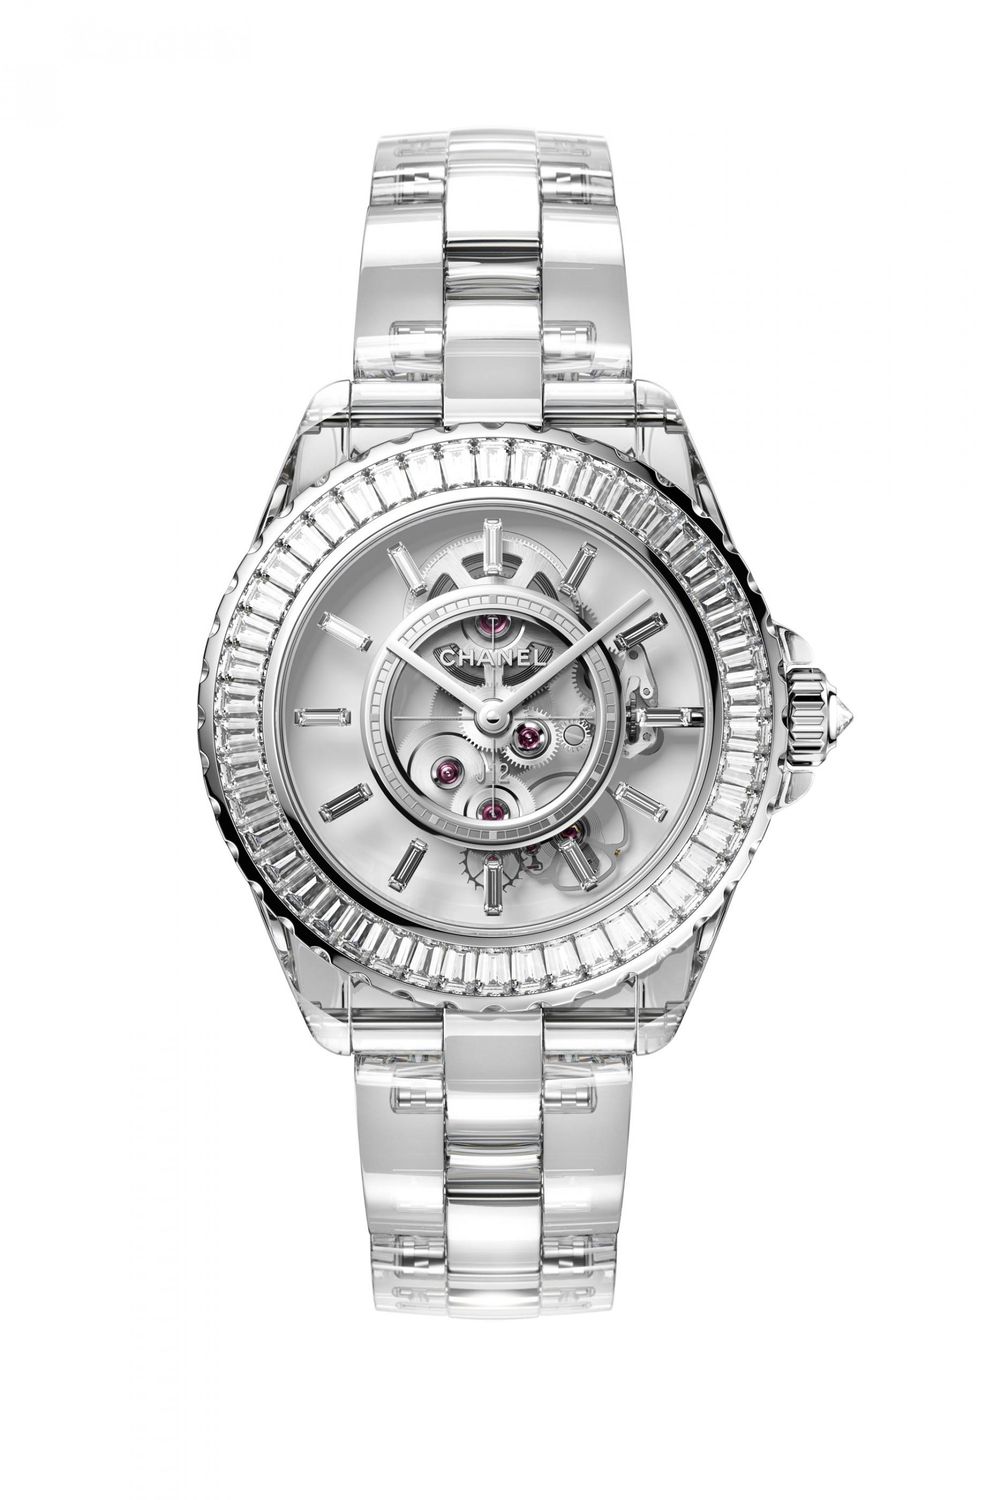 Sapphire On Sapphire, introducing the Chanel J12 X-Ray